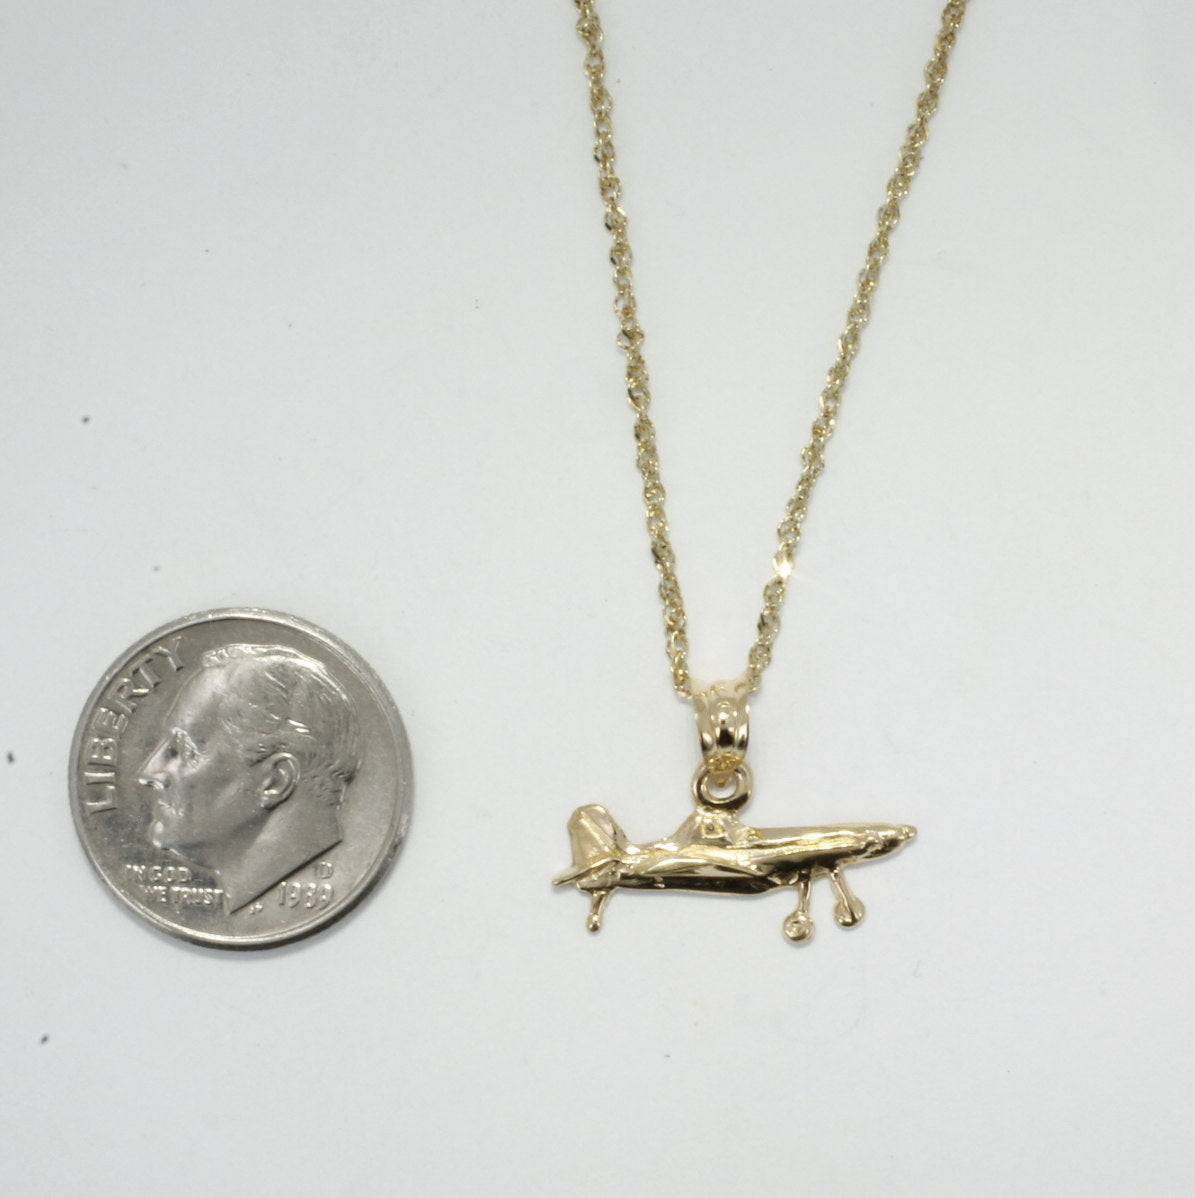 Small Airplane Air Tractor Necklace